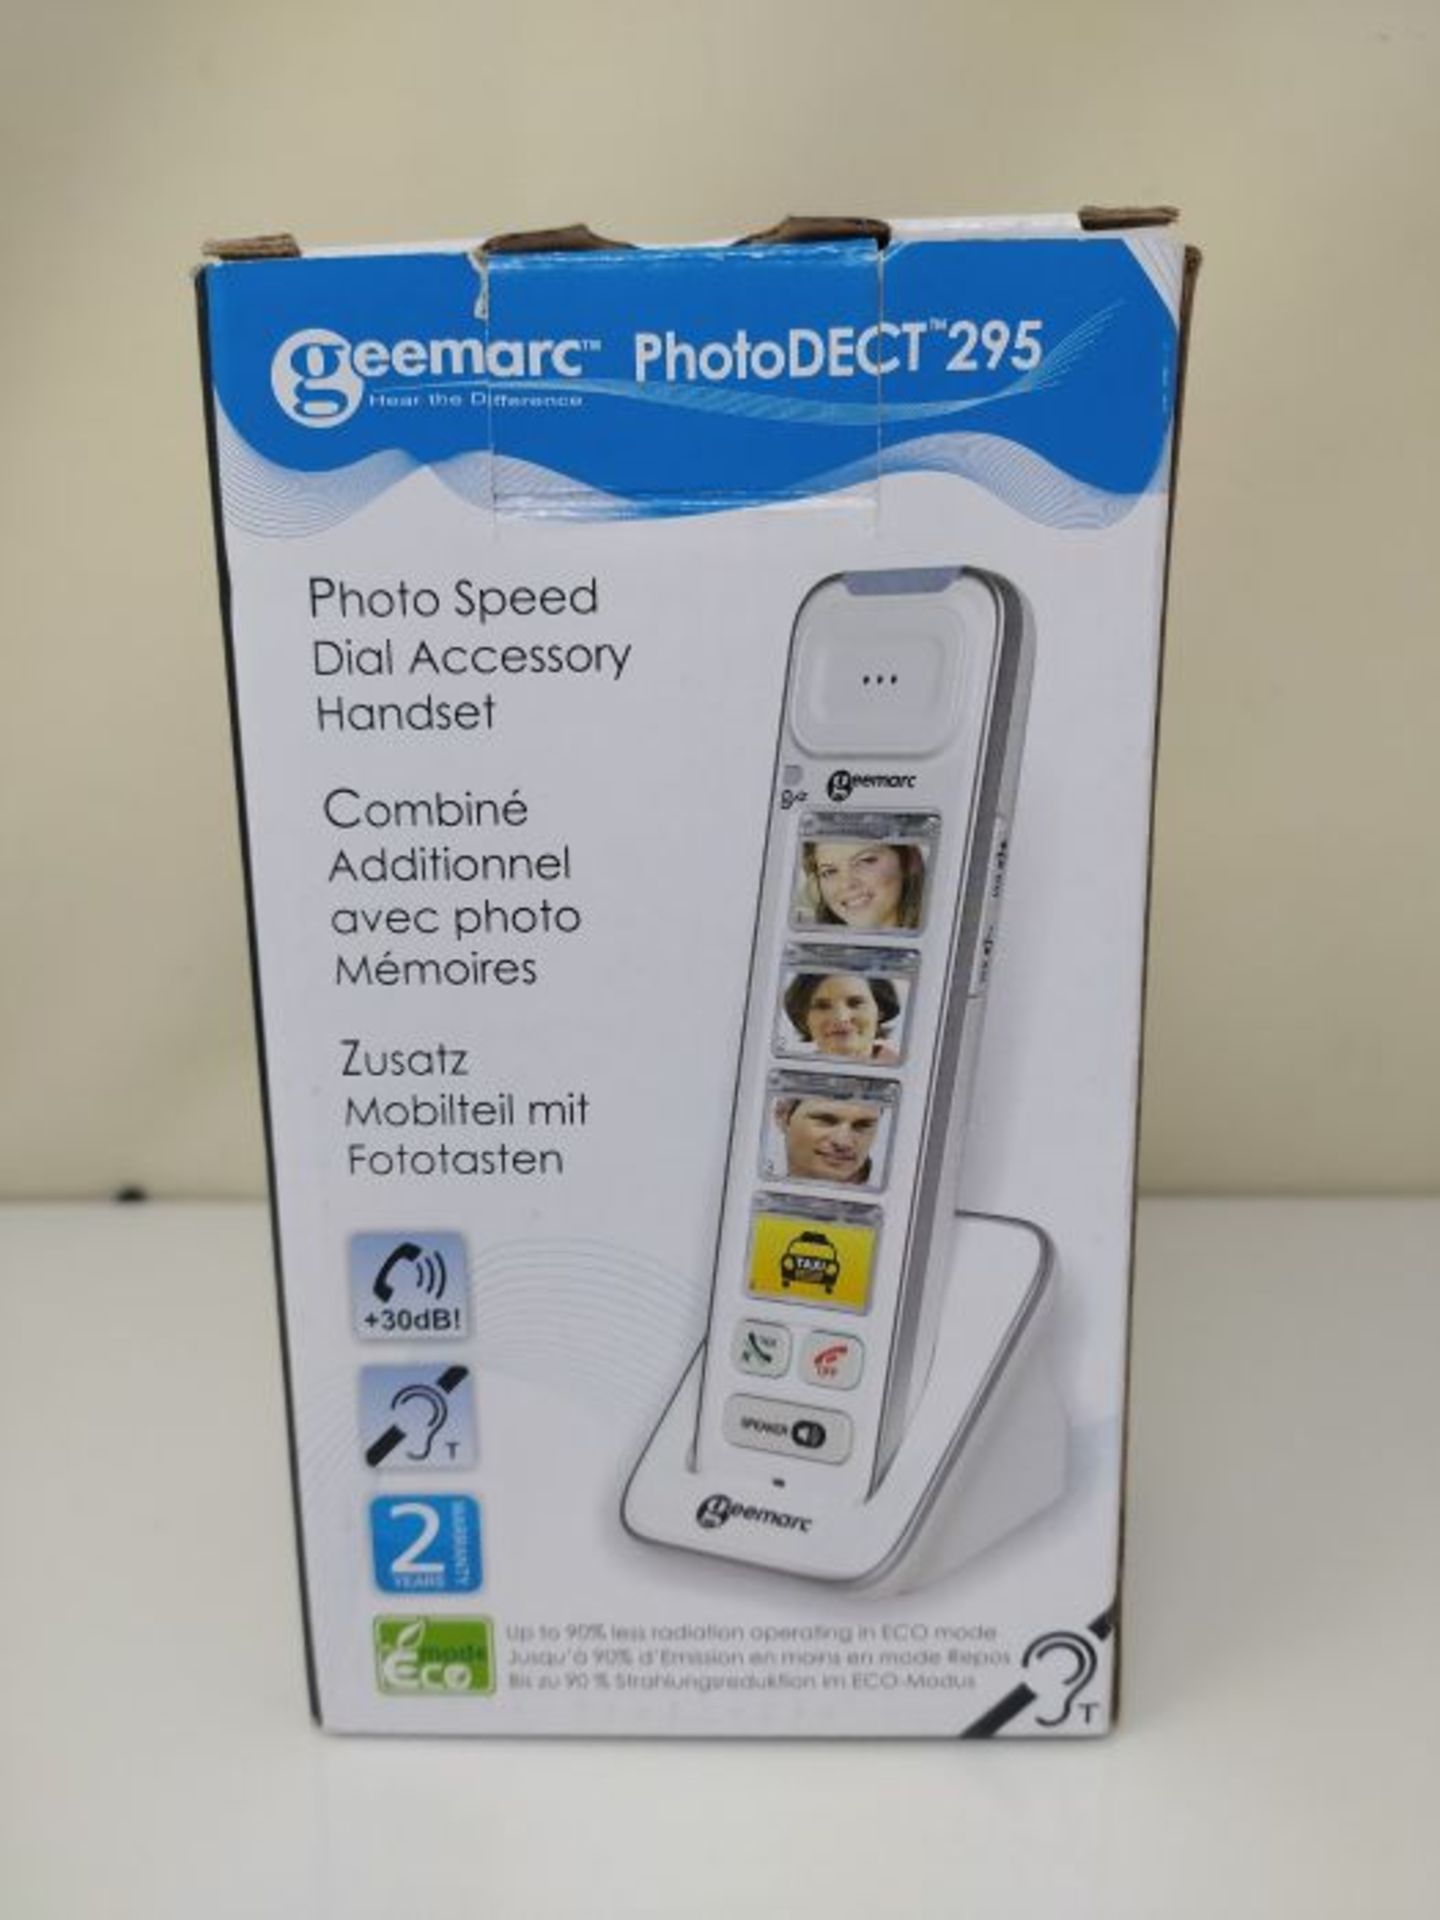 Geemarc PHOTODECT 295 - extra extra handset - white - Image 2 of 3